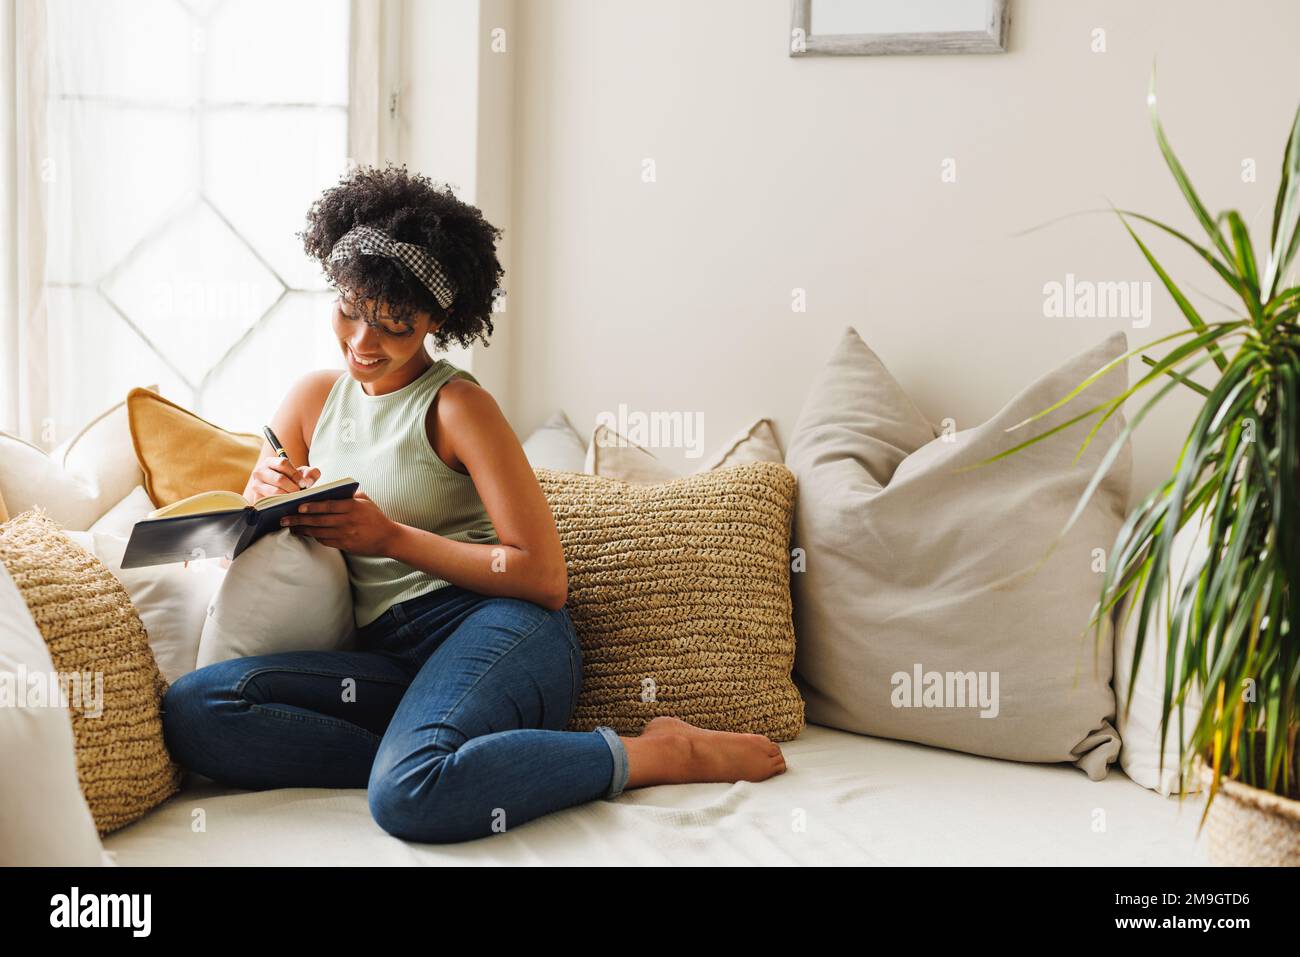 Smiling biracial young woman with afro hair writing in diary while sitting by window on sofa Stock Photo